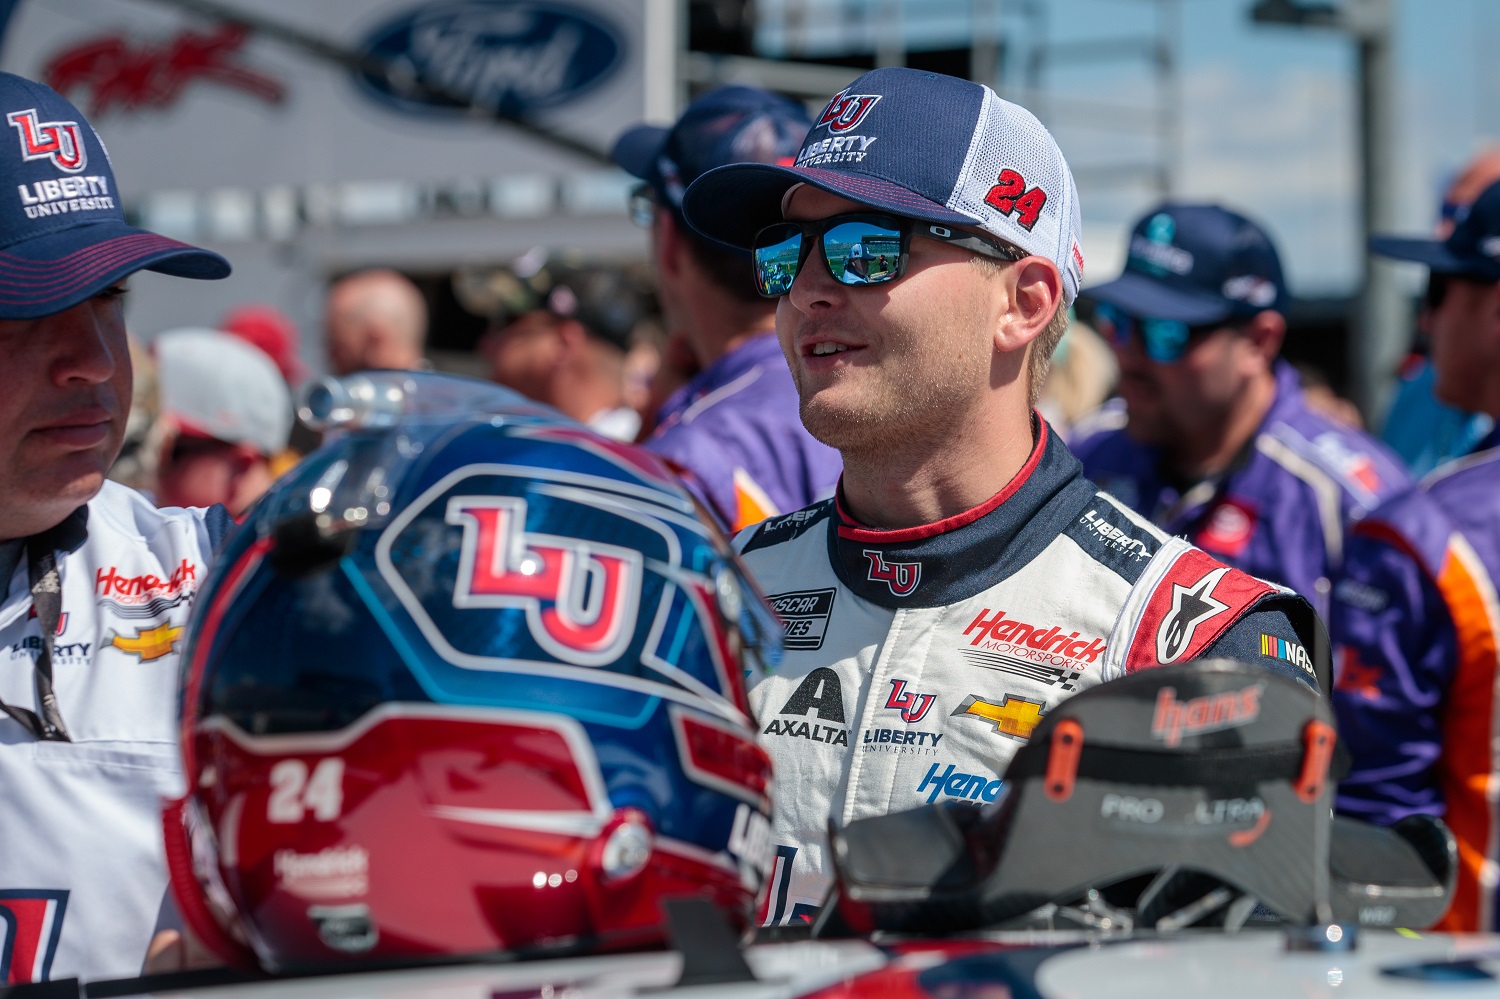 William Byron speaks with his crew on pit road prior to the NASCAR Cup Series Hollywood Casino 400 at Kansas Speedway. | William Purnell/Icon Sportswire via Getty Images